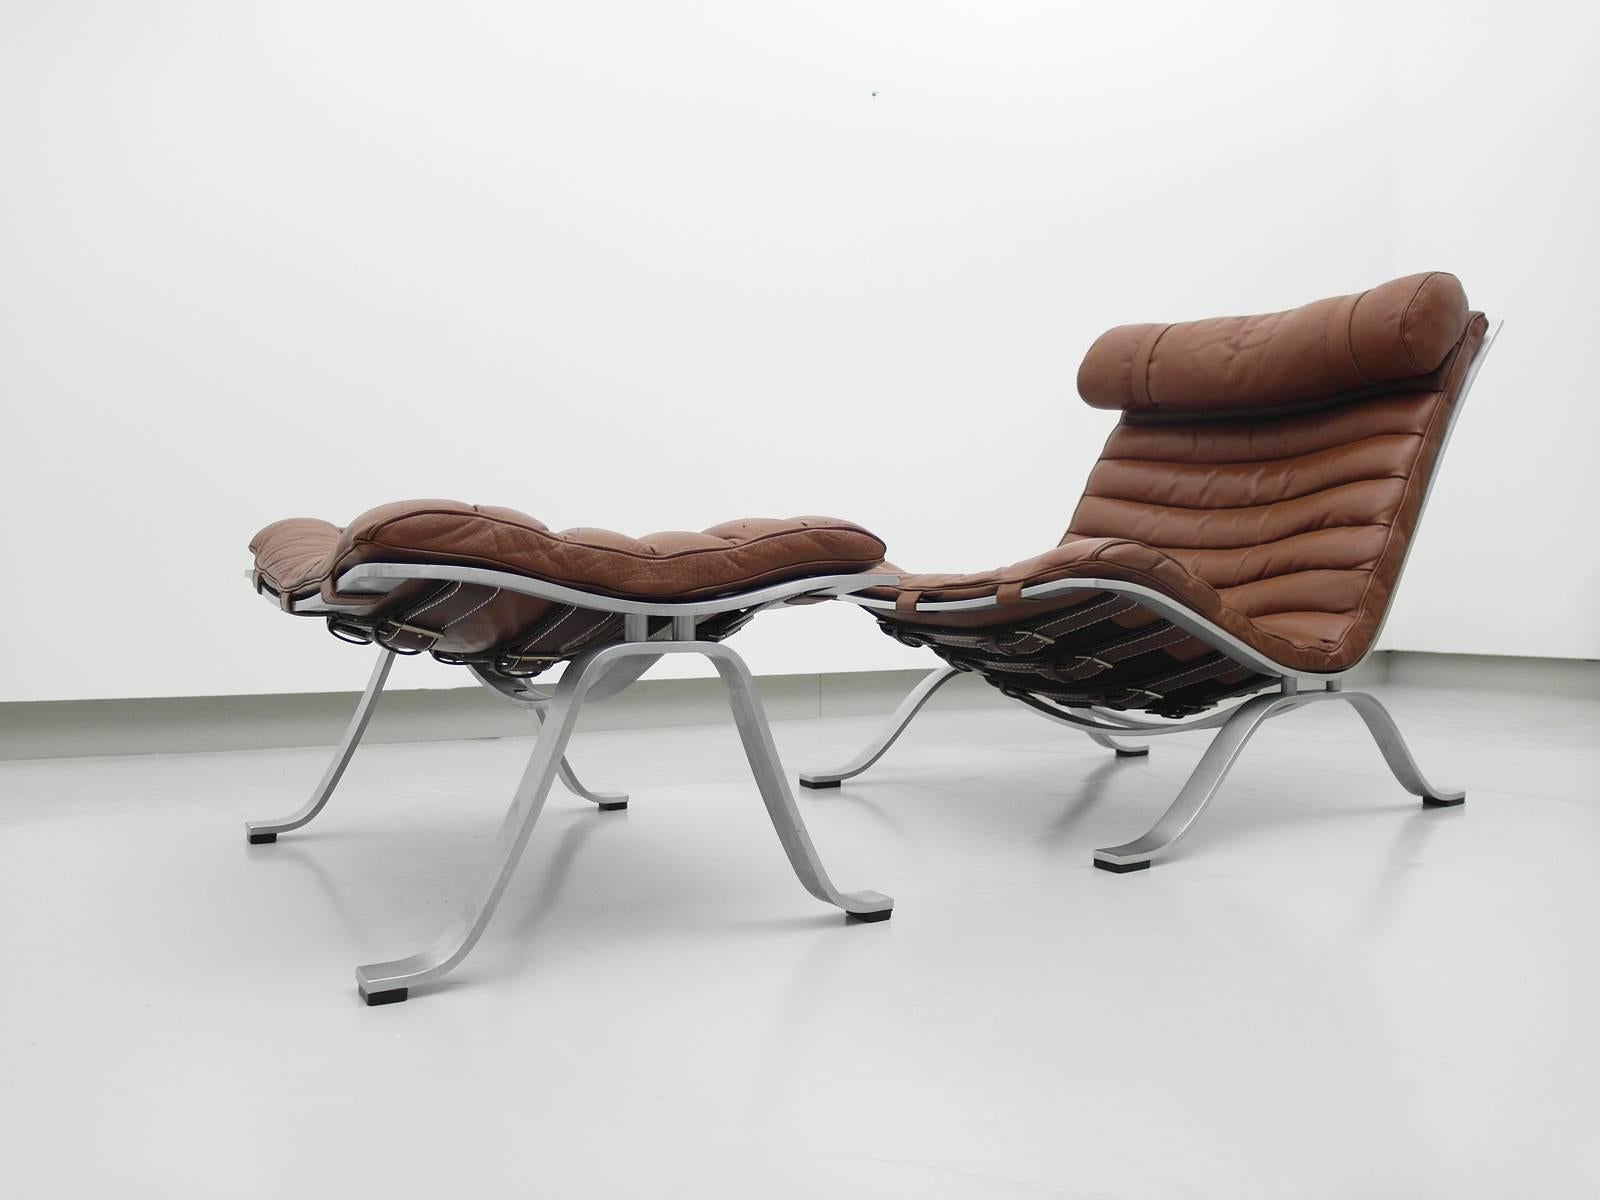 Comfortable lounge chair with ottoman designed by Arne Norell for Norell MöBel, Aneby, Sweden, 1966. 
This award winning lounge chair was made of high quality flat chrome-plated steel and has very thick original leather. 
The chair is in great